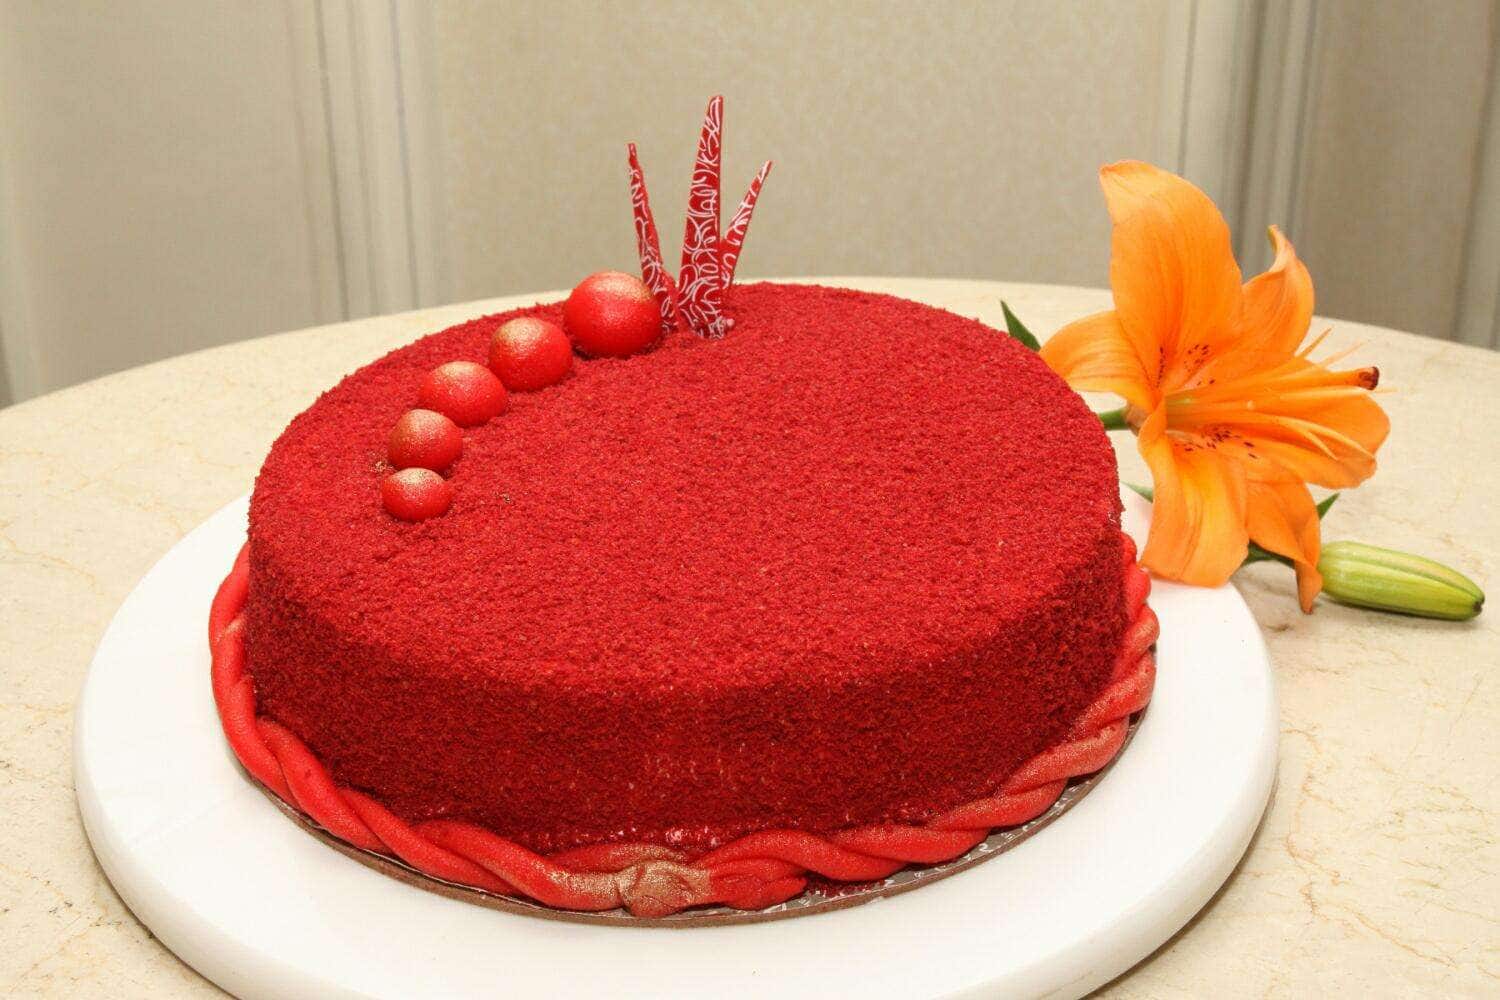 Send Taj Cakes Online to India | Gifts2IndiaOnline